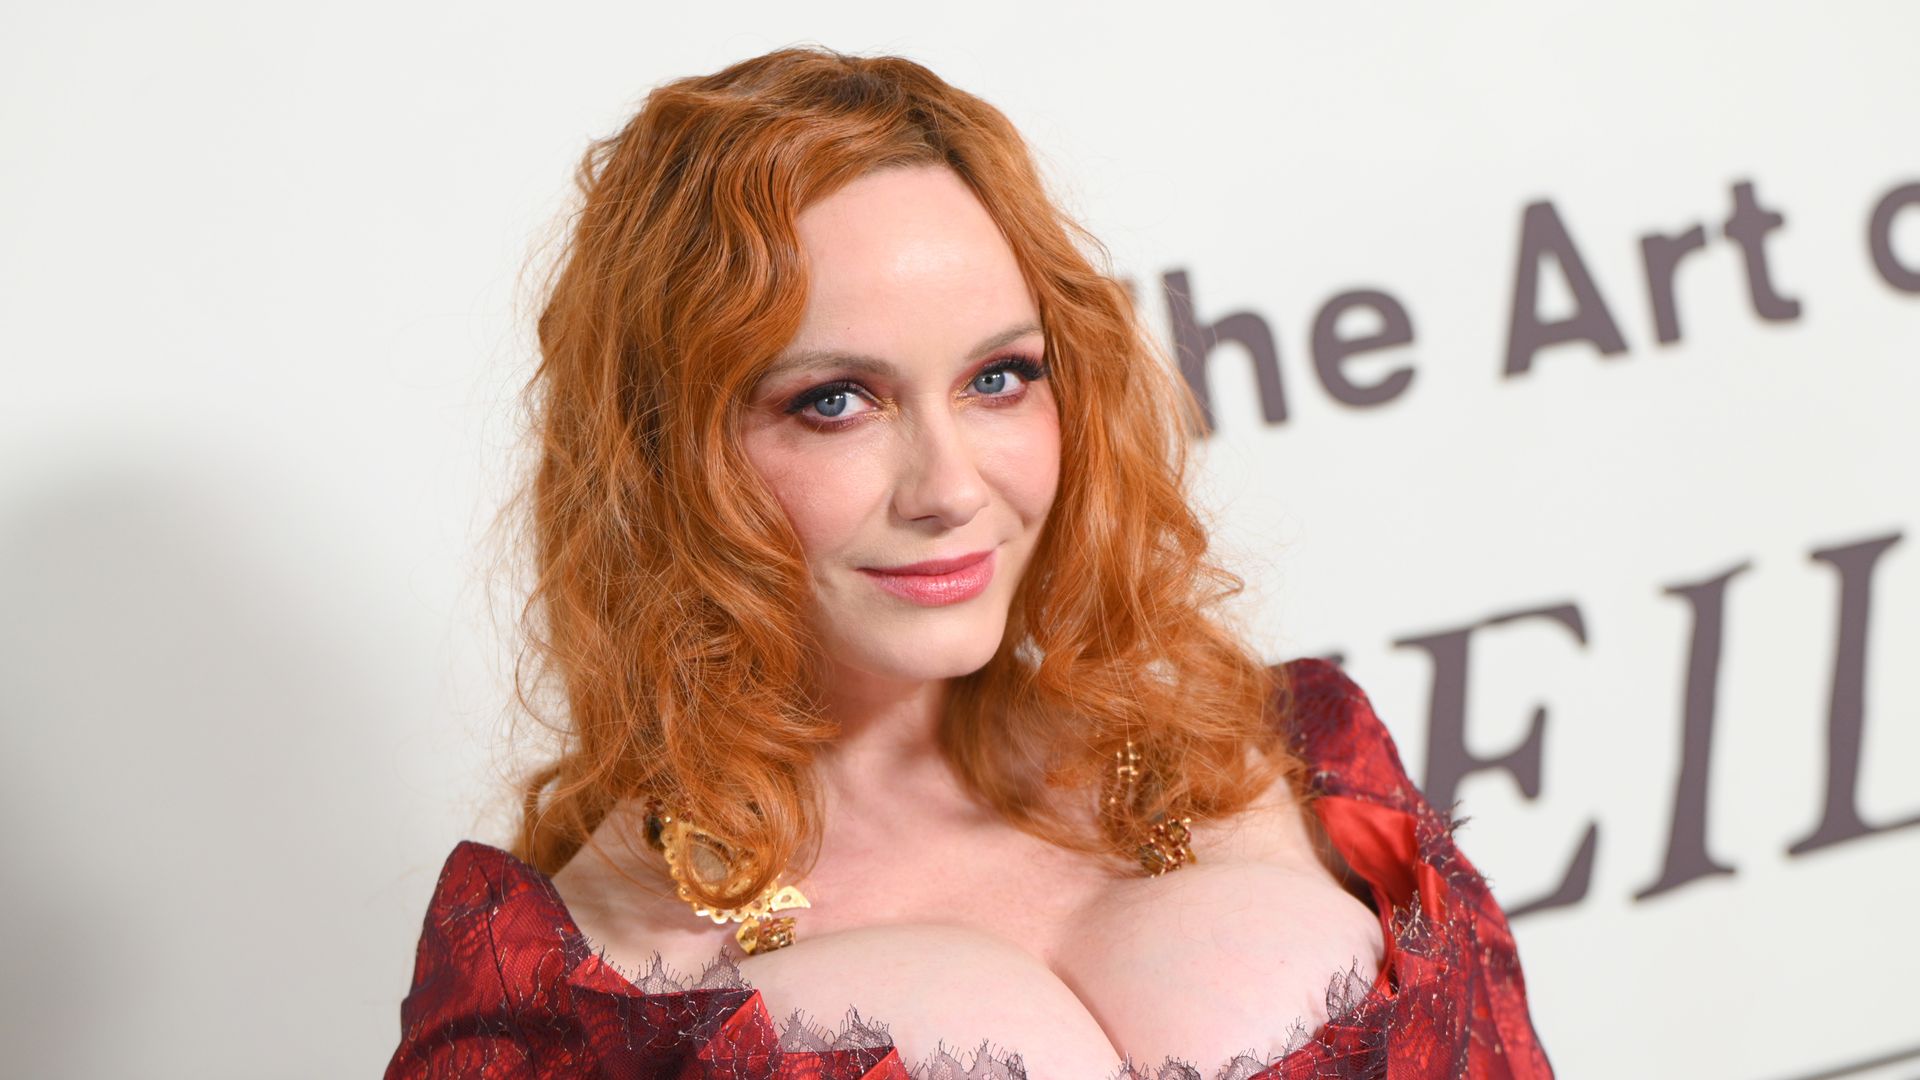 Christina Hendricks hosts second wedding ceremony two weeks after New Orleans nuptials for bittersweet family reason